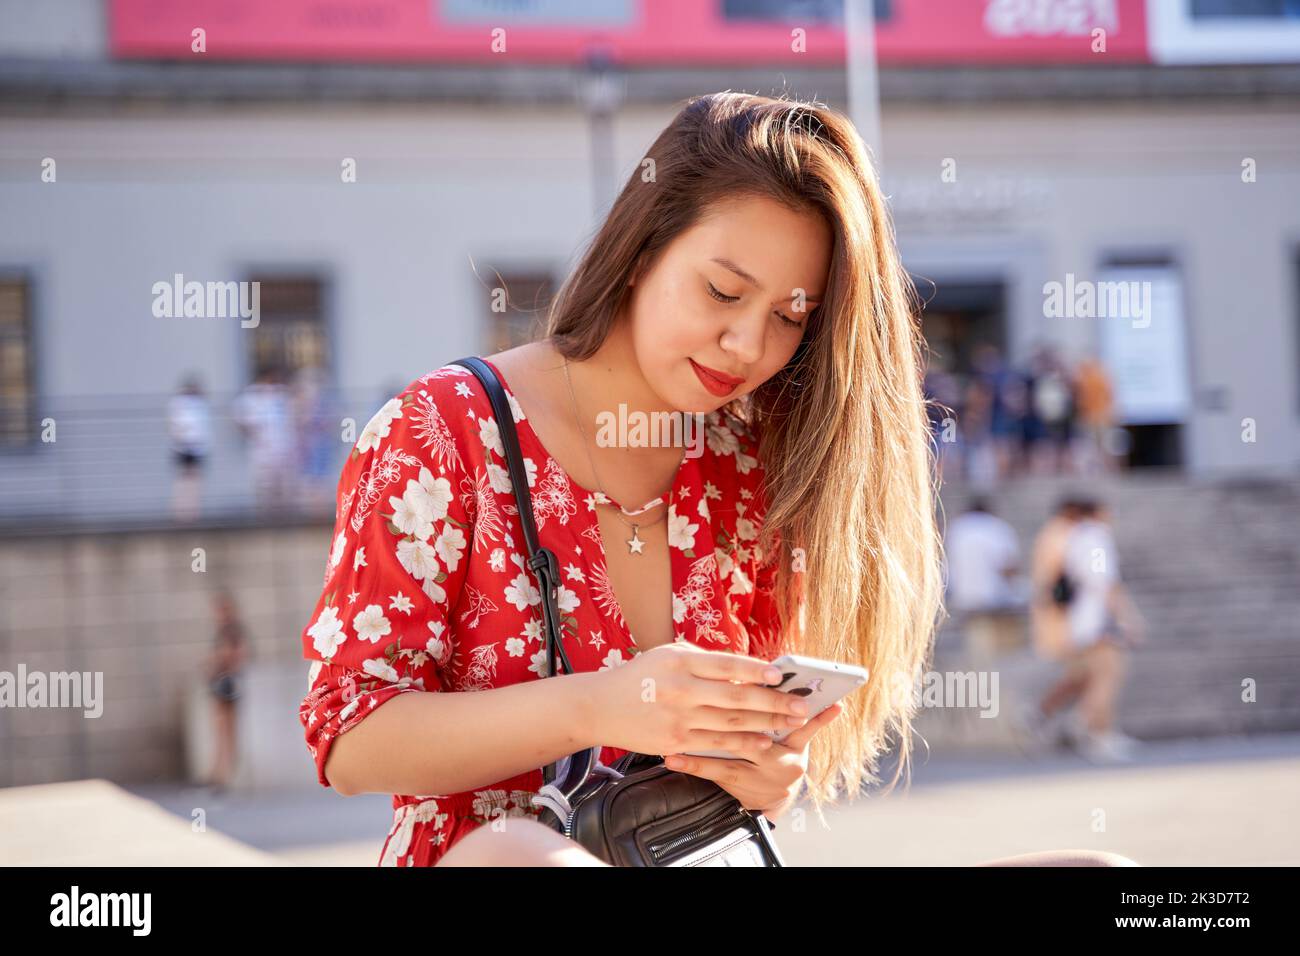 young latina woman with long blonde hair using her smart phone for social networking Stock Photo